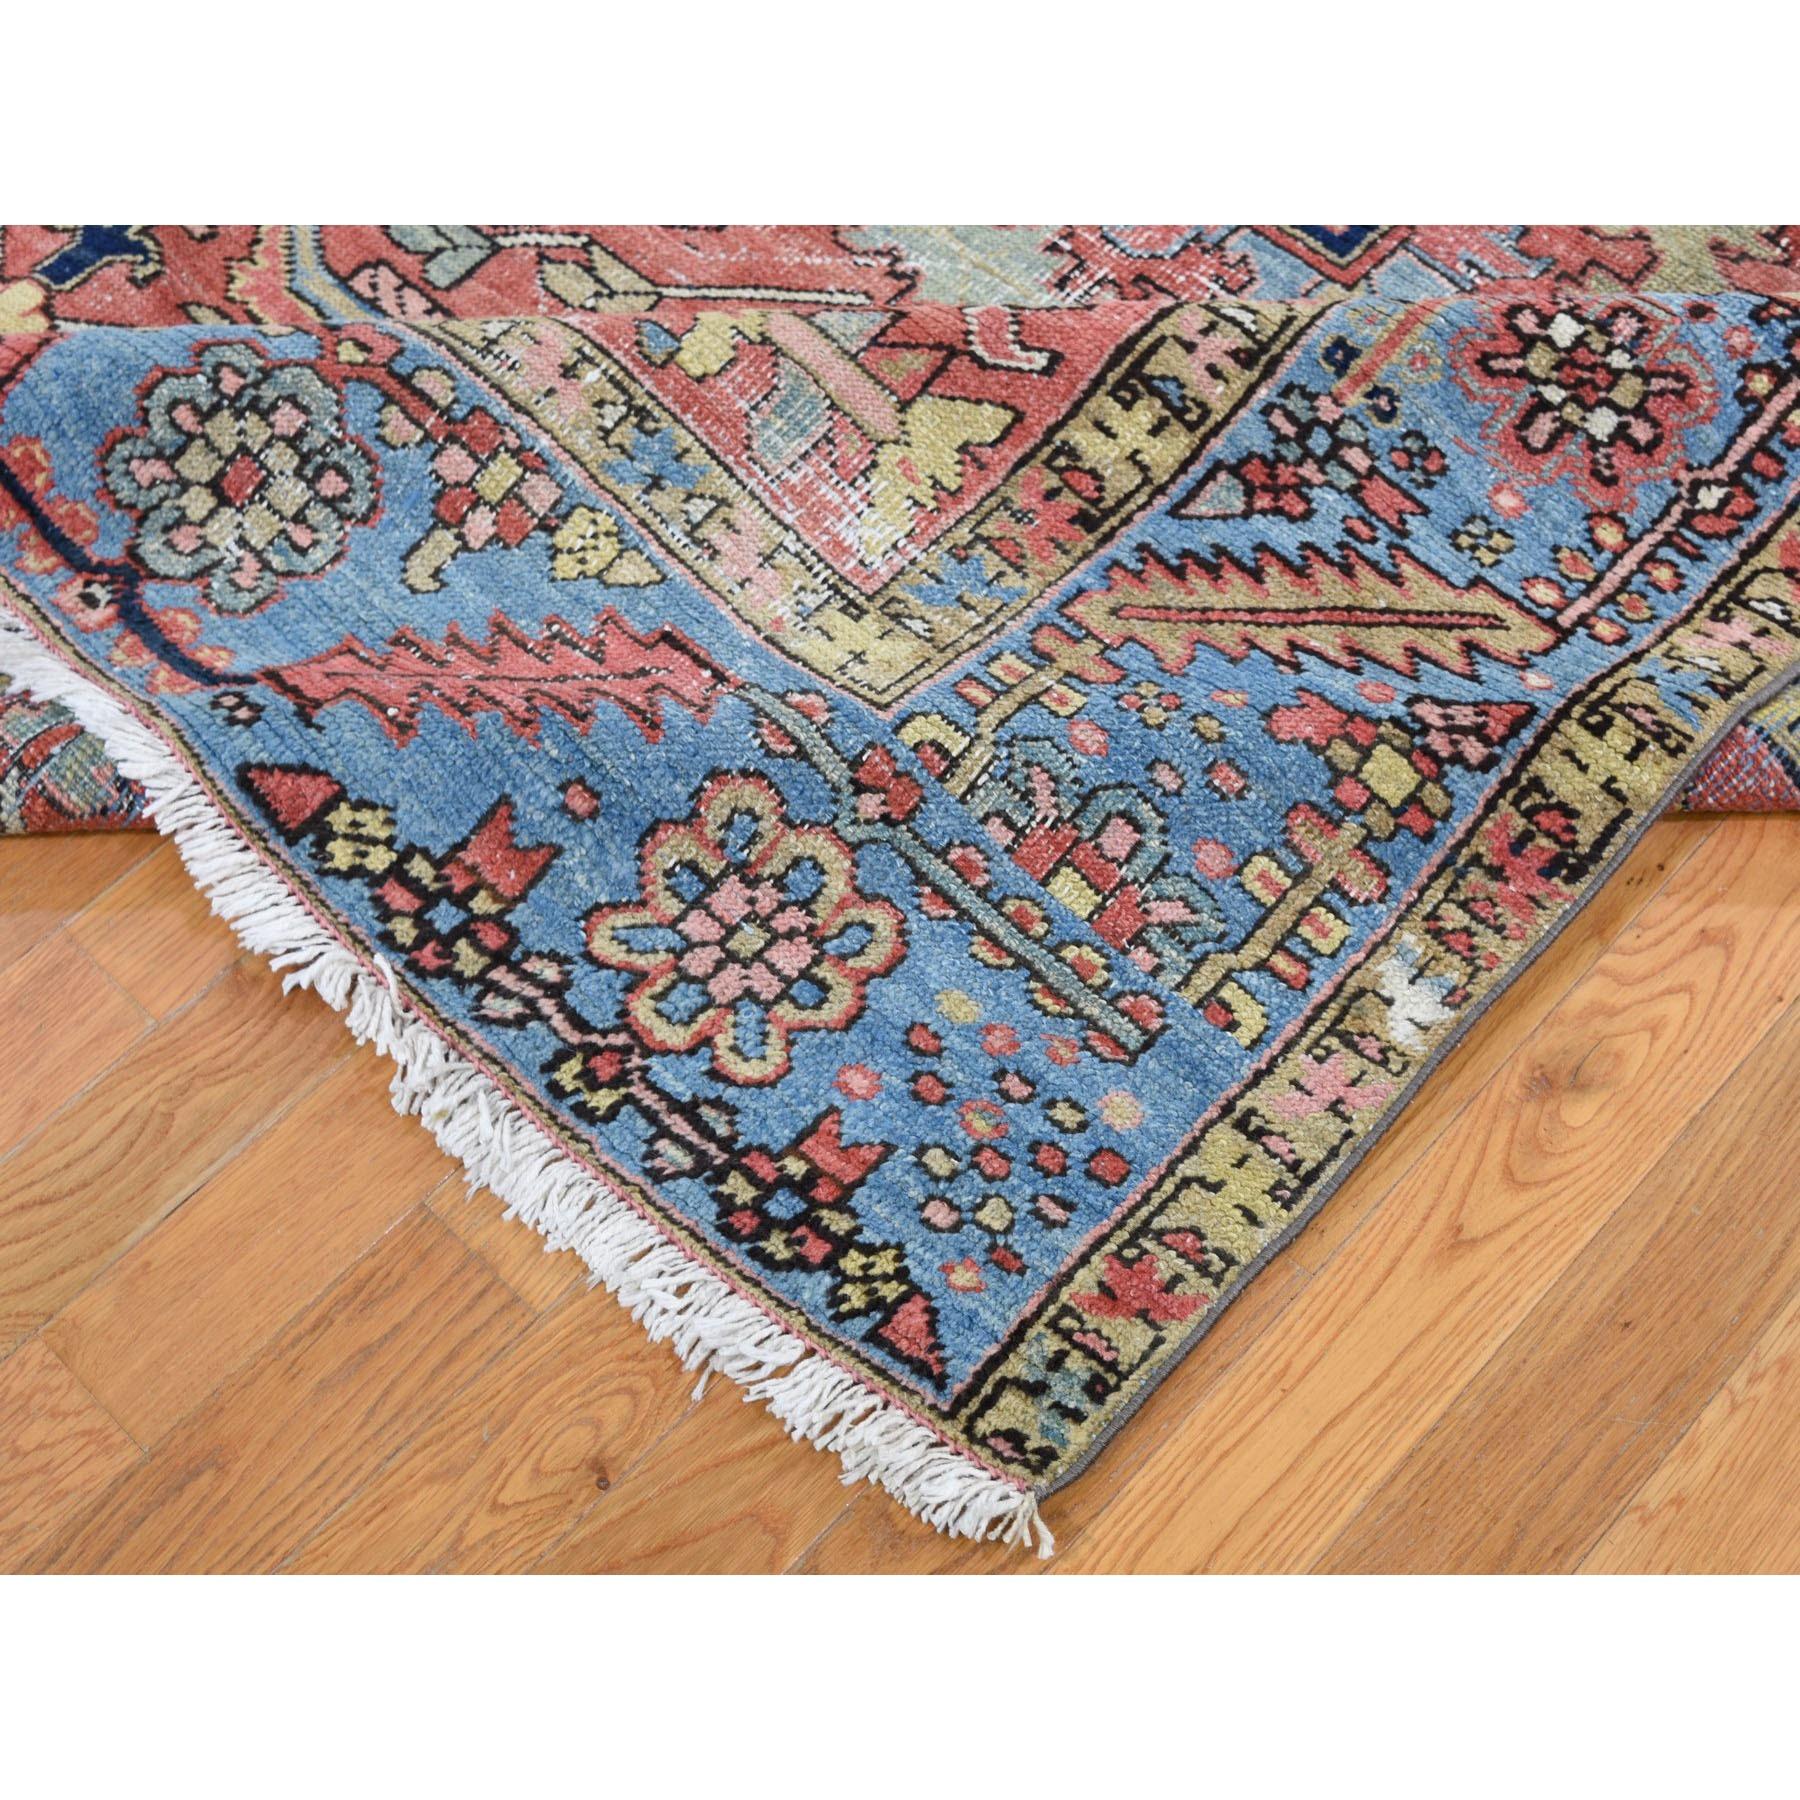 Wool Red Antique Persian Heriz Some Wear Clean Hand Knotted Oriental Rug